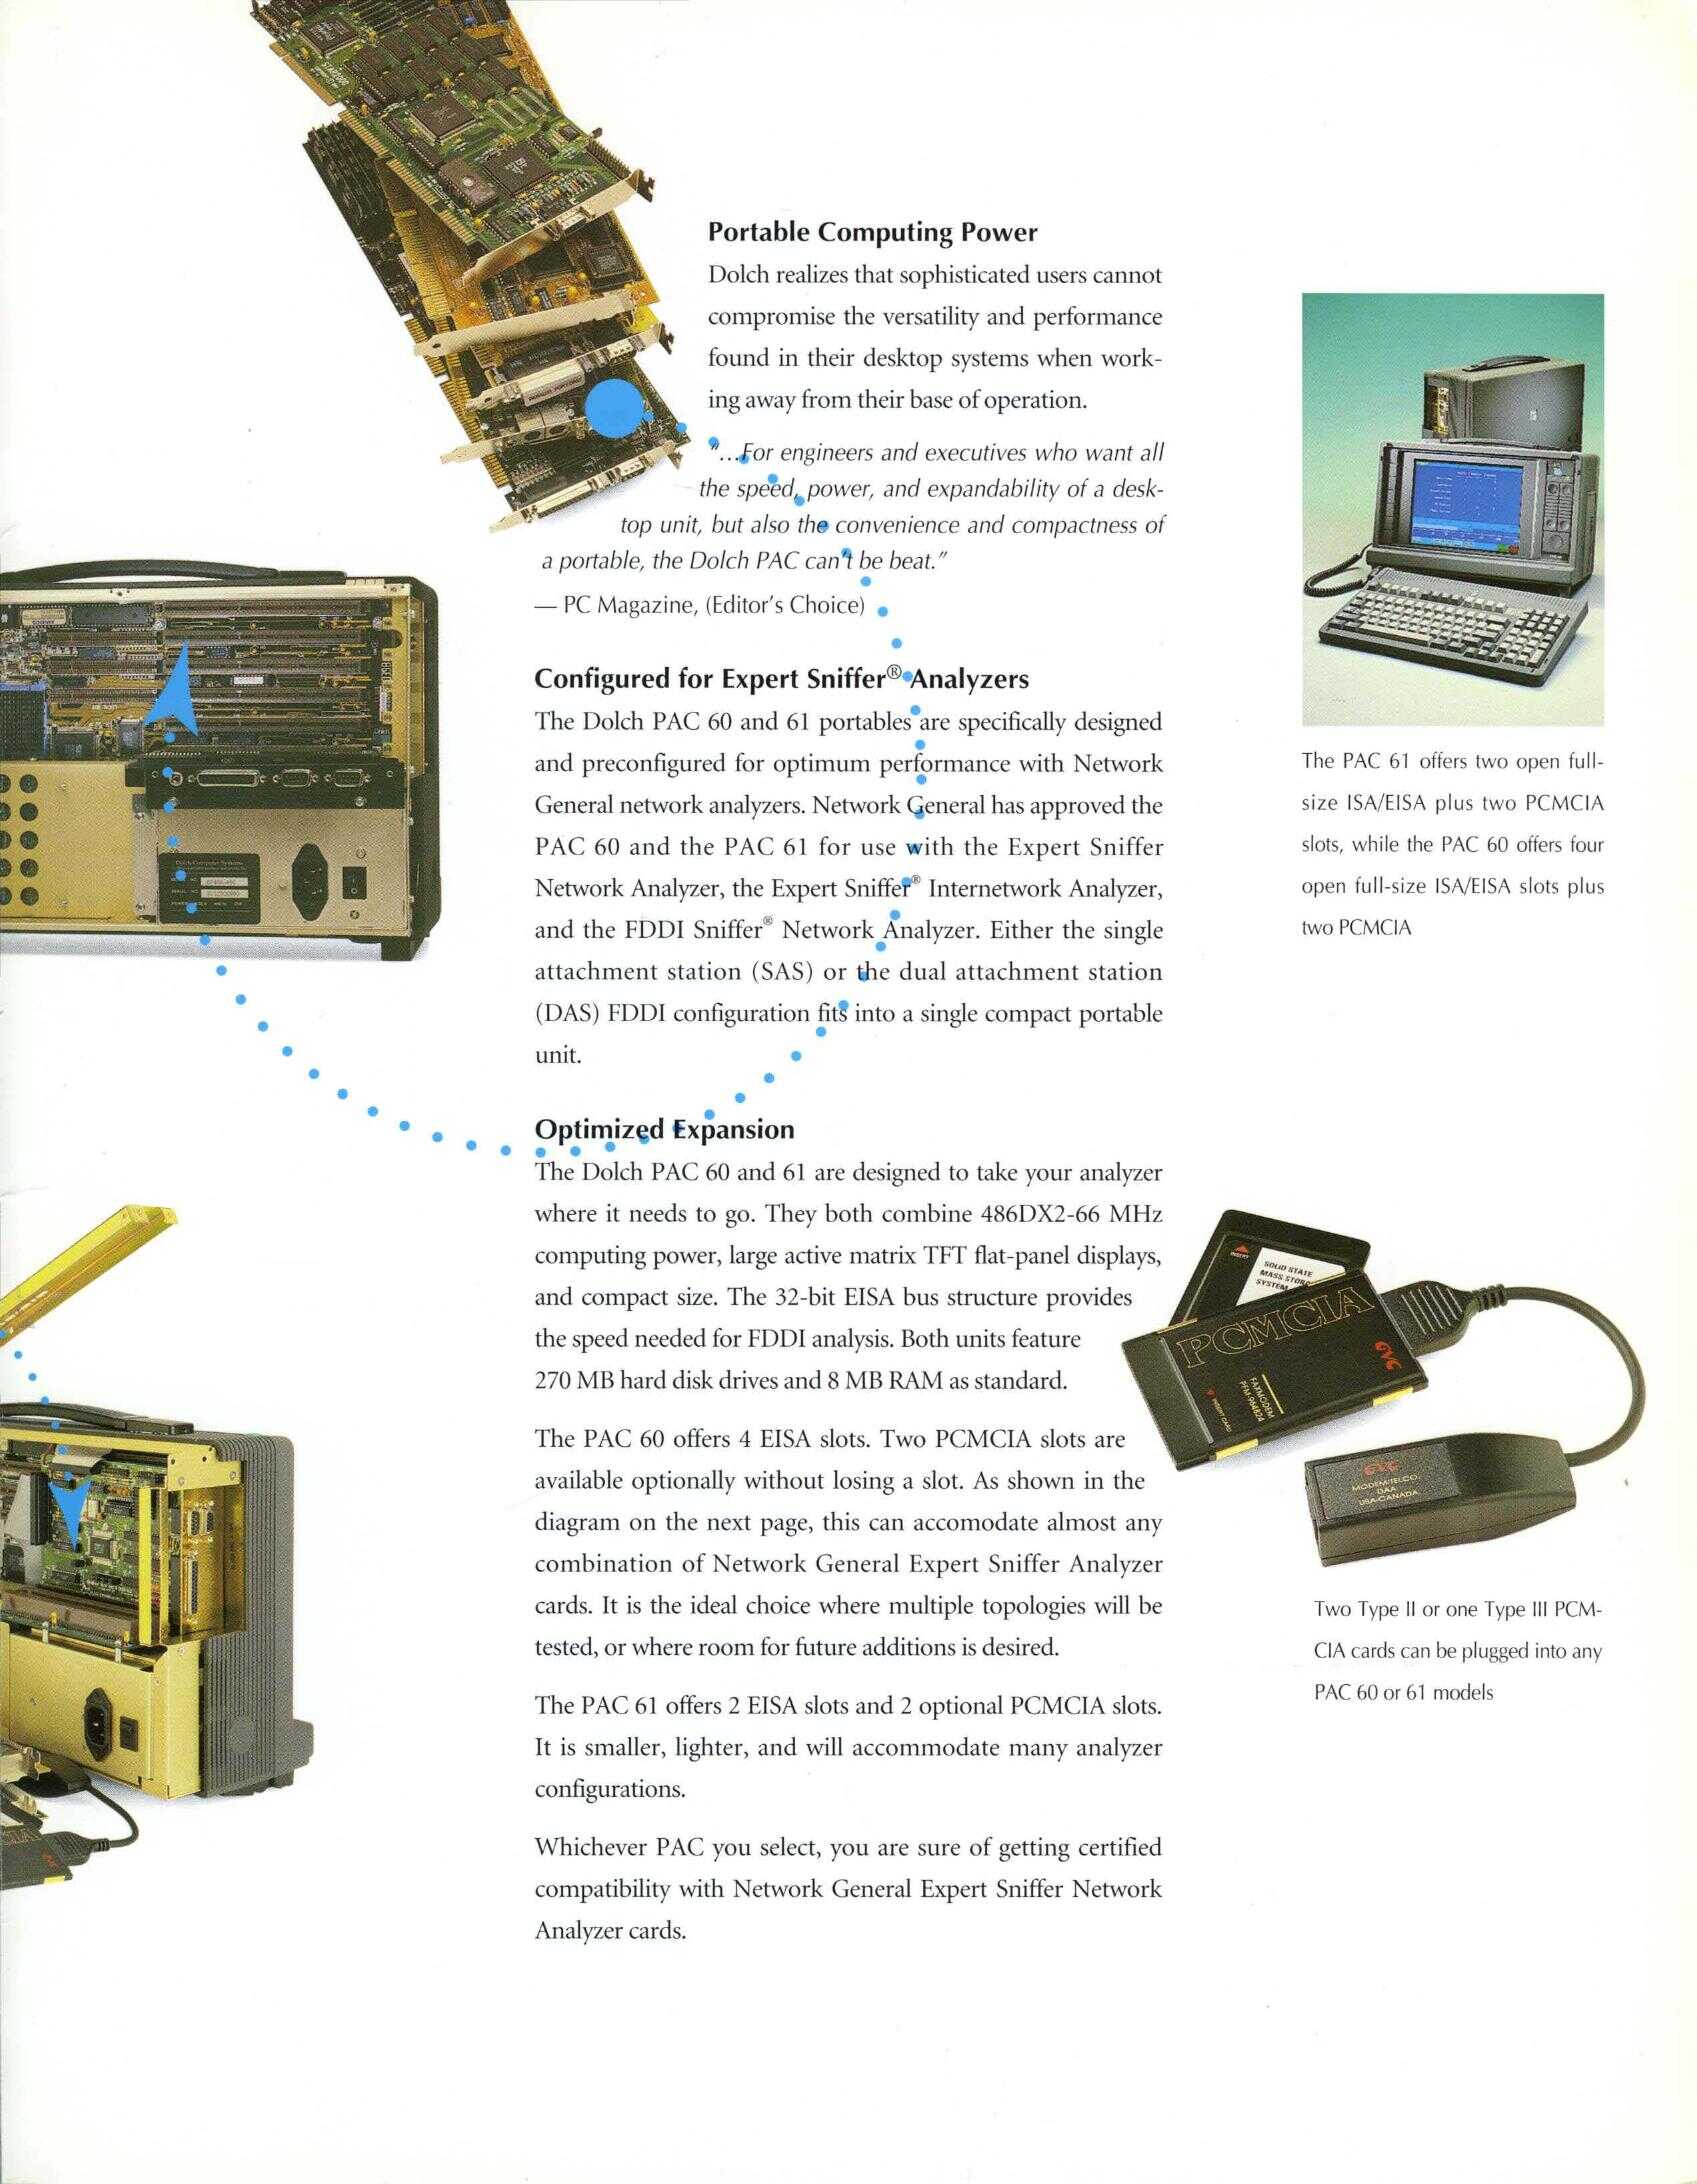 Dolch PAC60 Brochure 3 of 4